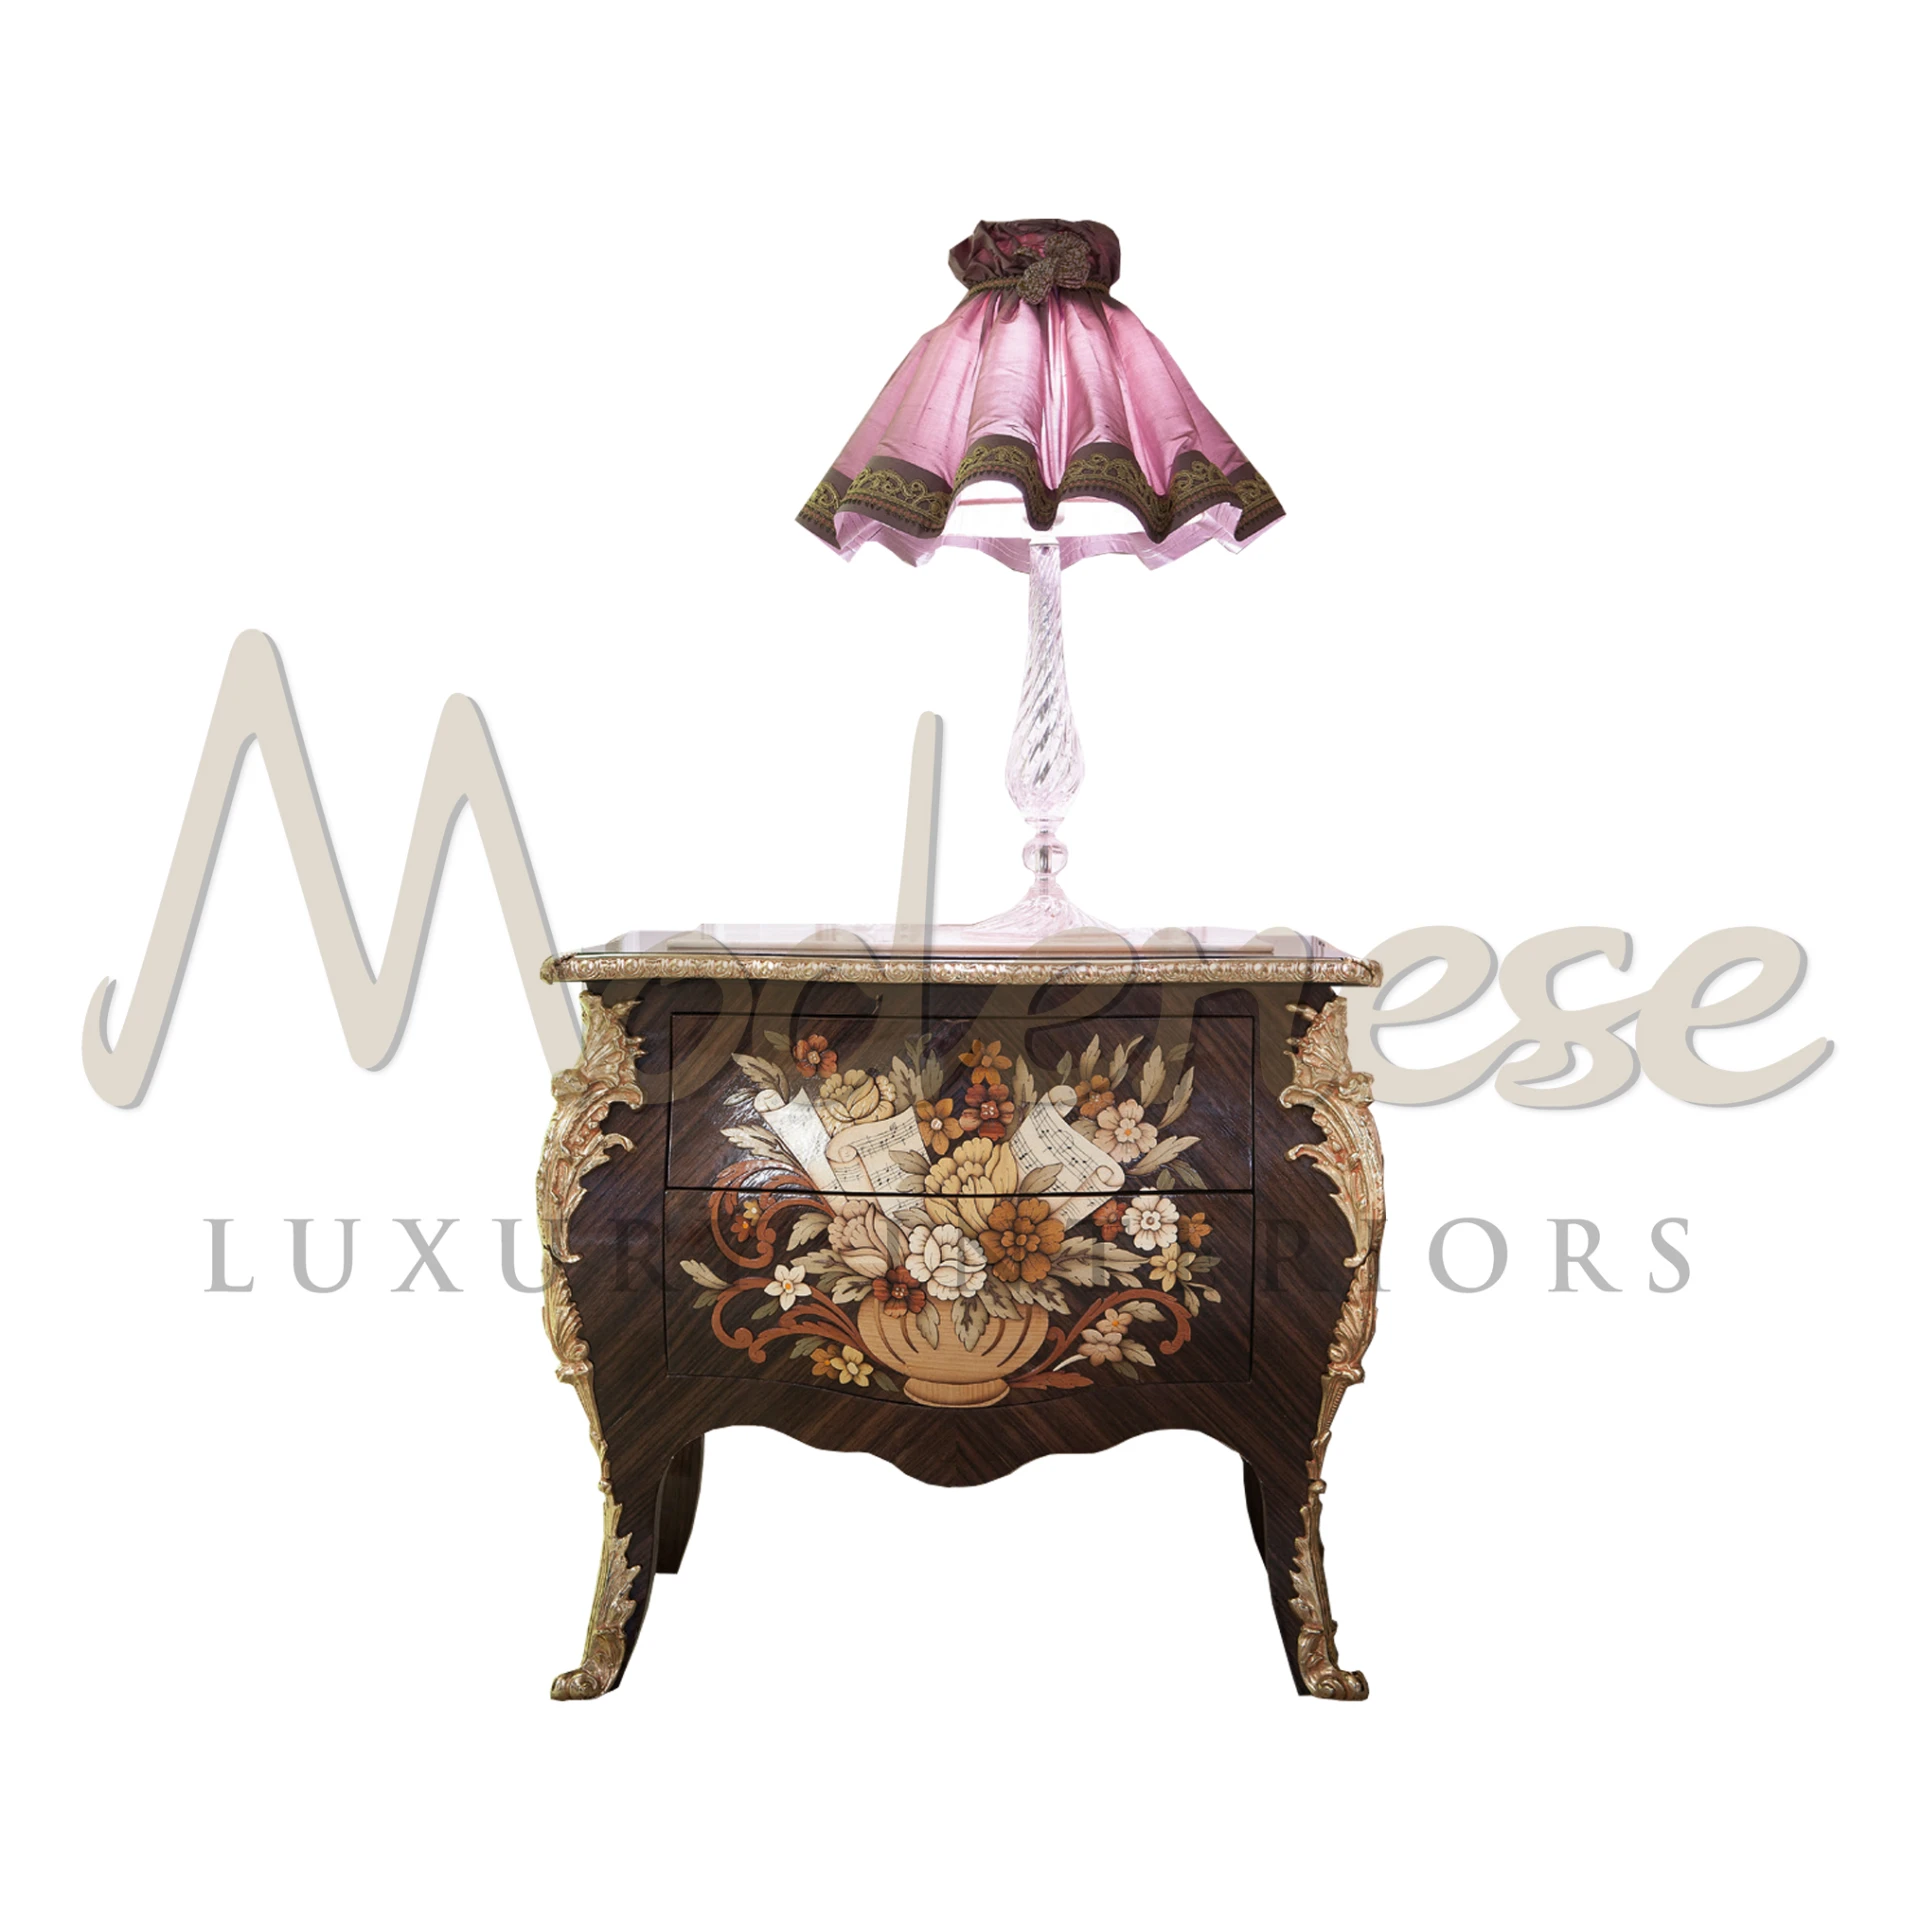 Classic wooden nightstand with intricate floral marquetry and golden accents, featuring curved legs and a decorative pink table lamp with tassel details.